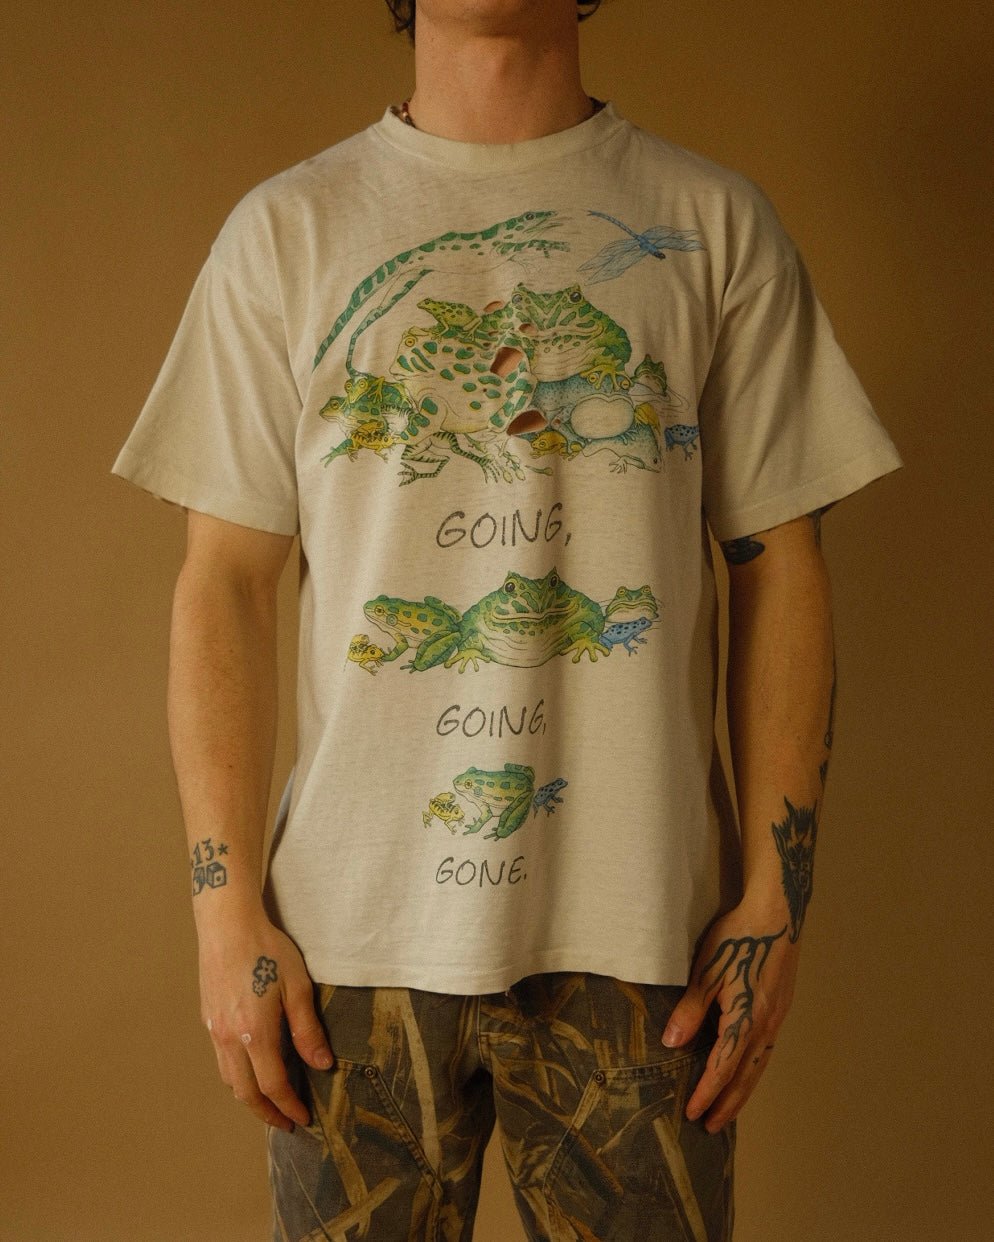 1992 “Going, Going, Gone” Tee